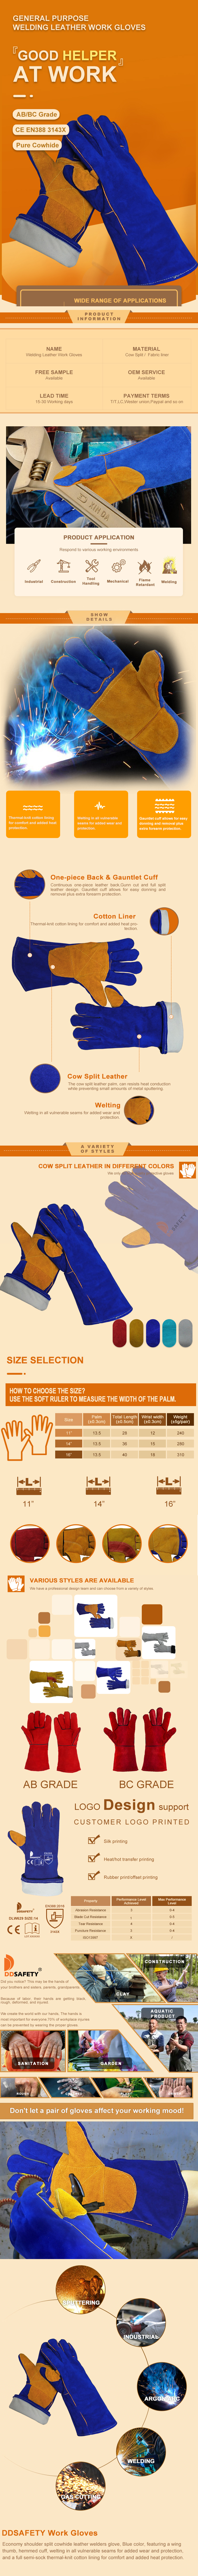 China OEM Industrial Blue Welding Cow Split Leather Safety Working Gloves - DLW629 China OEM Industrial Blue Welding Cow Split Leather Safety Working Gloves - DLW629 welding gloves,Protective Industrial Products,Welding Cow Split Leather Safety Working Gloves